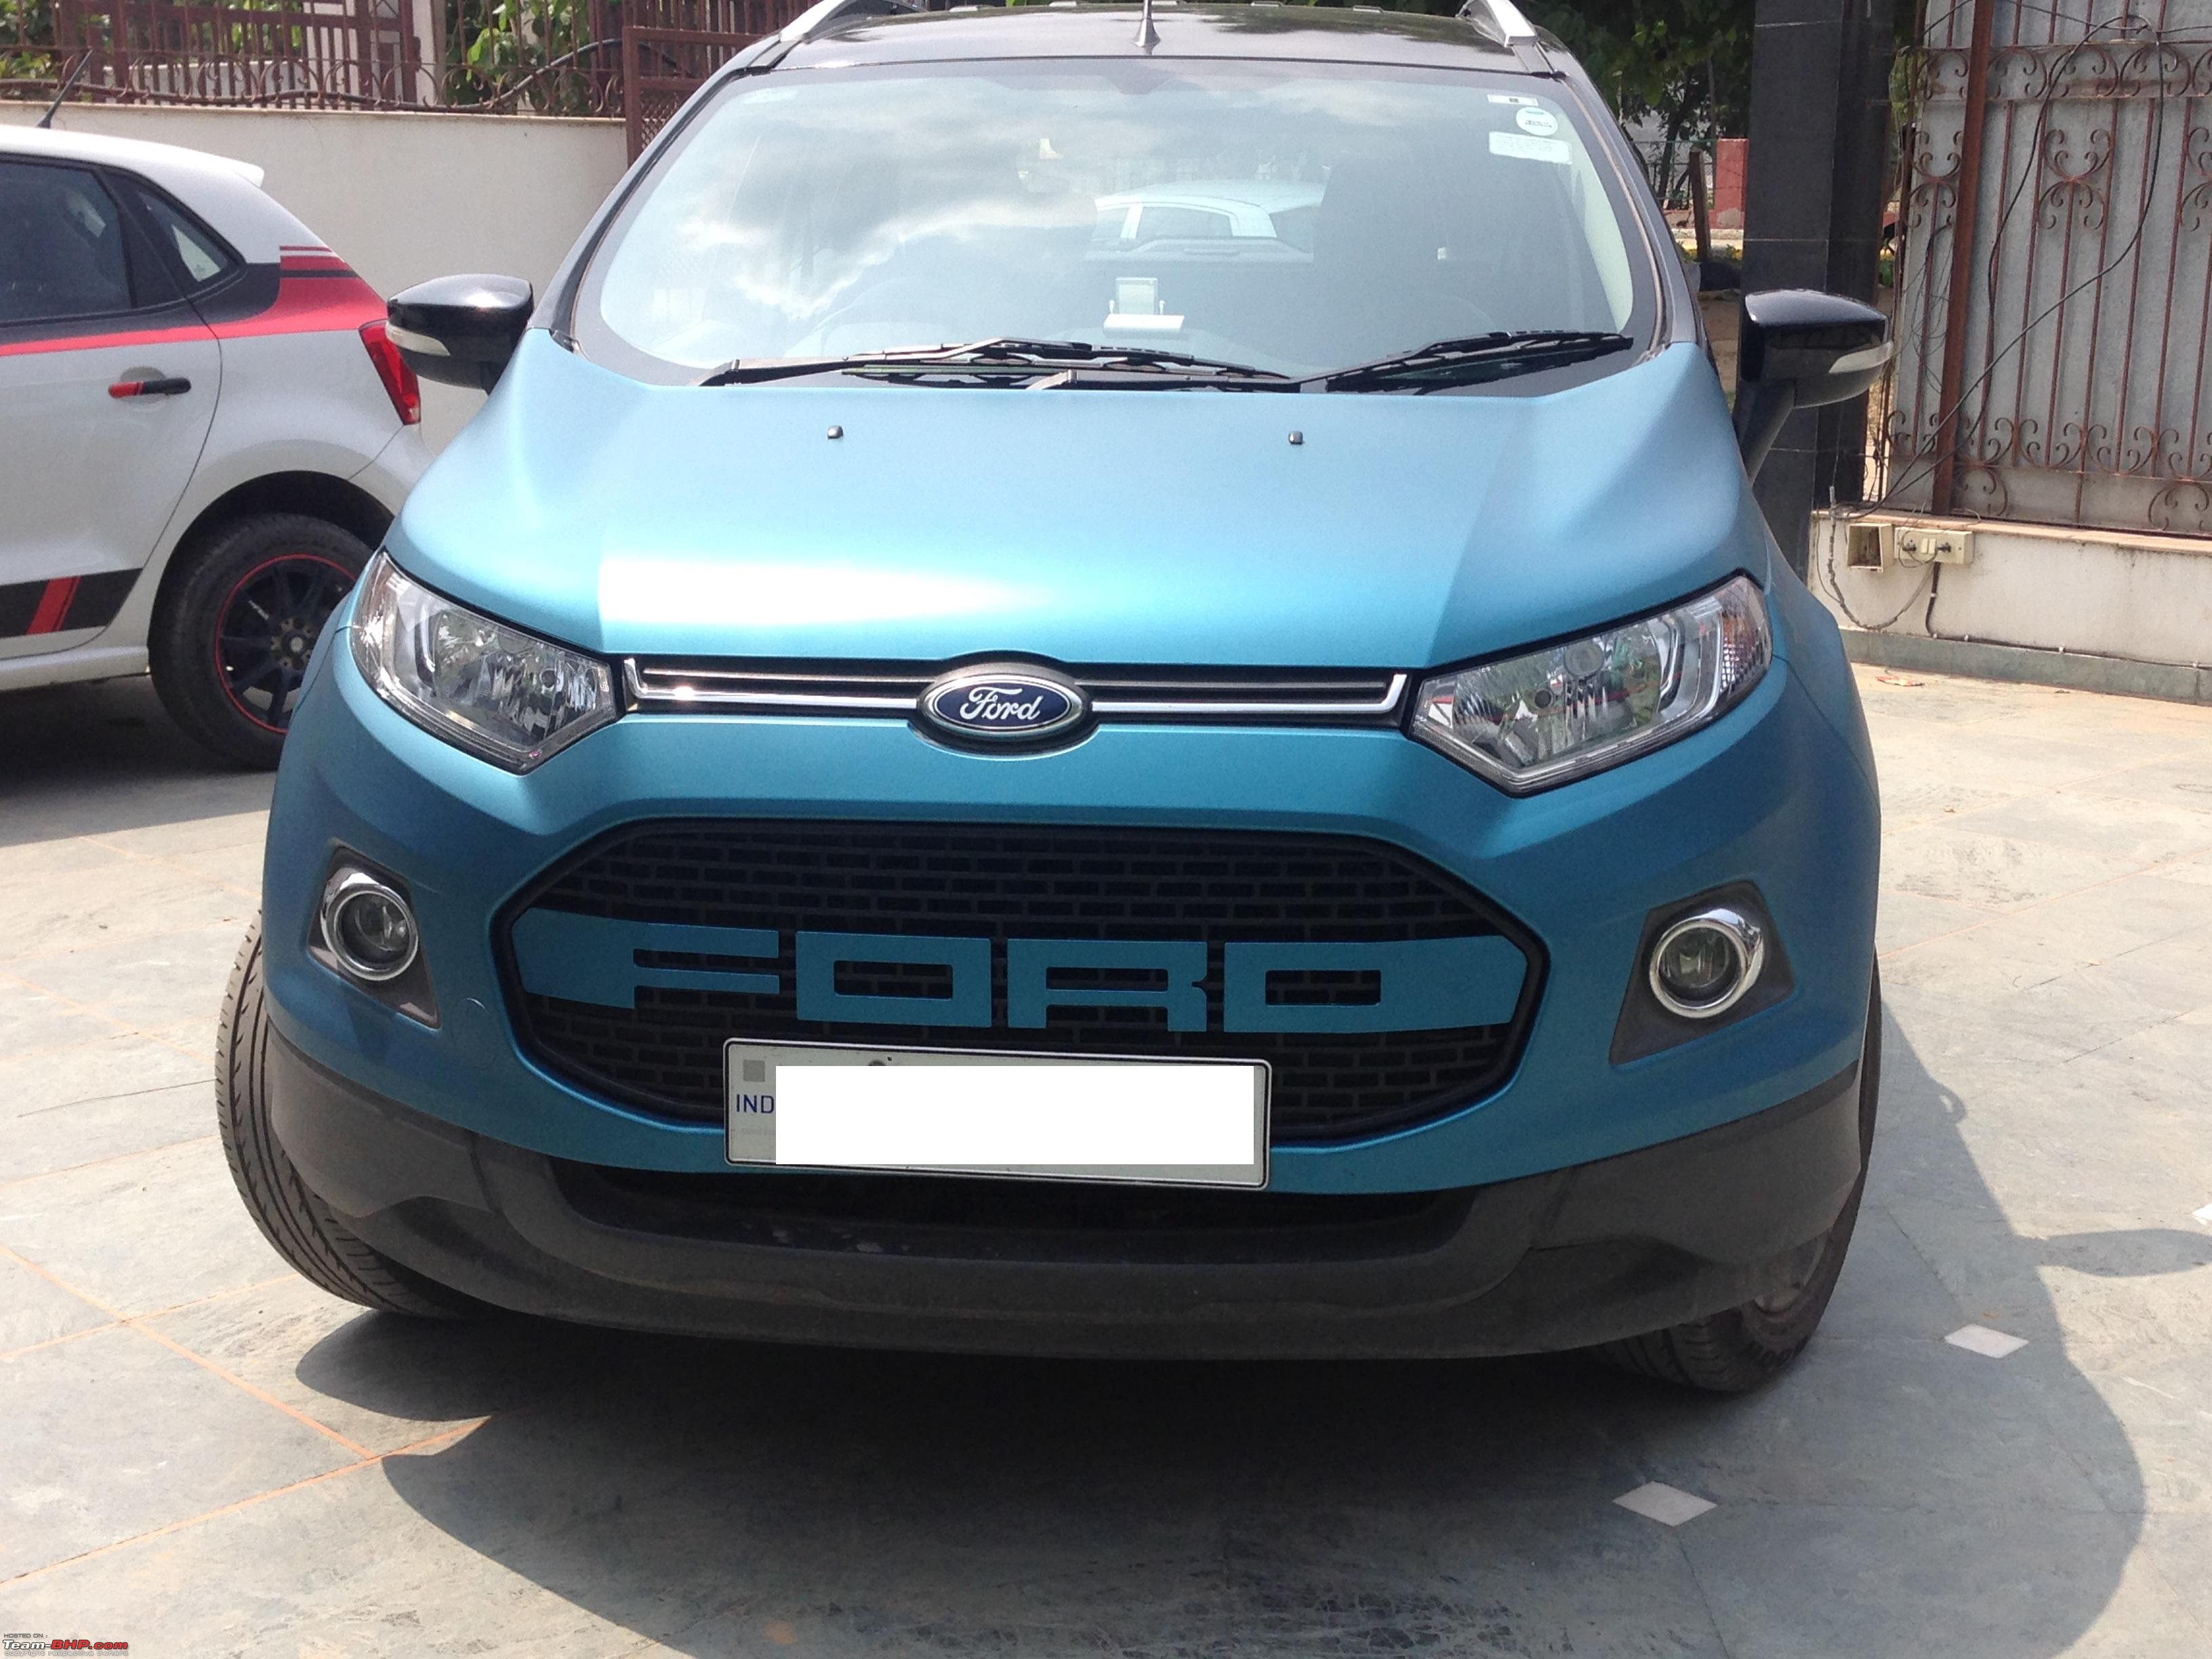 Ford ecosport review team bhp #4